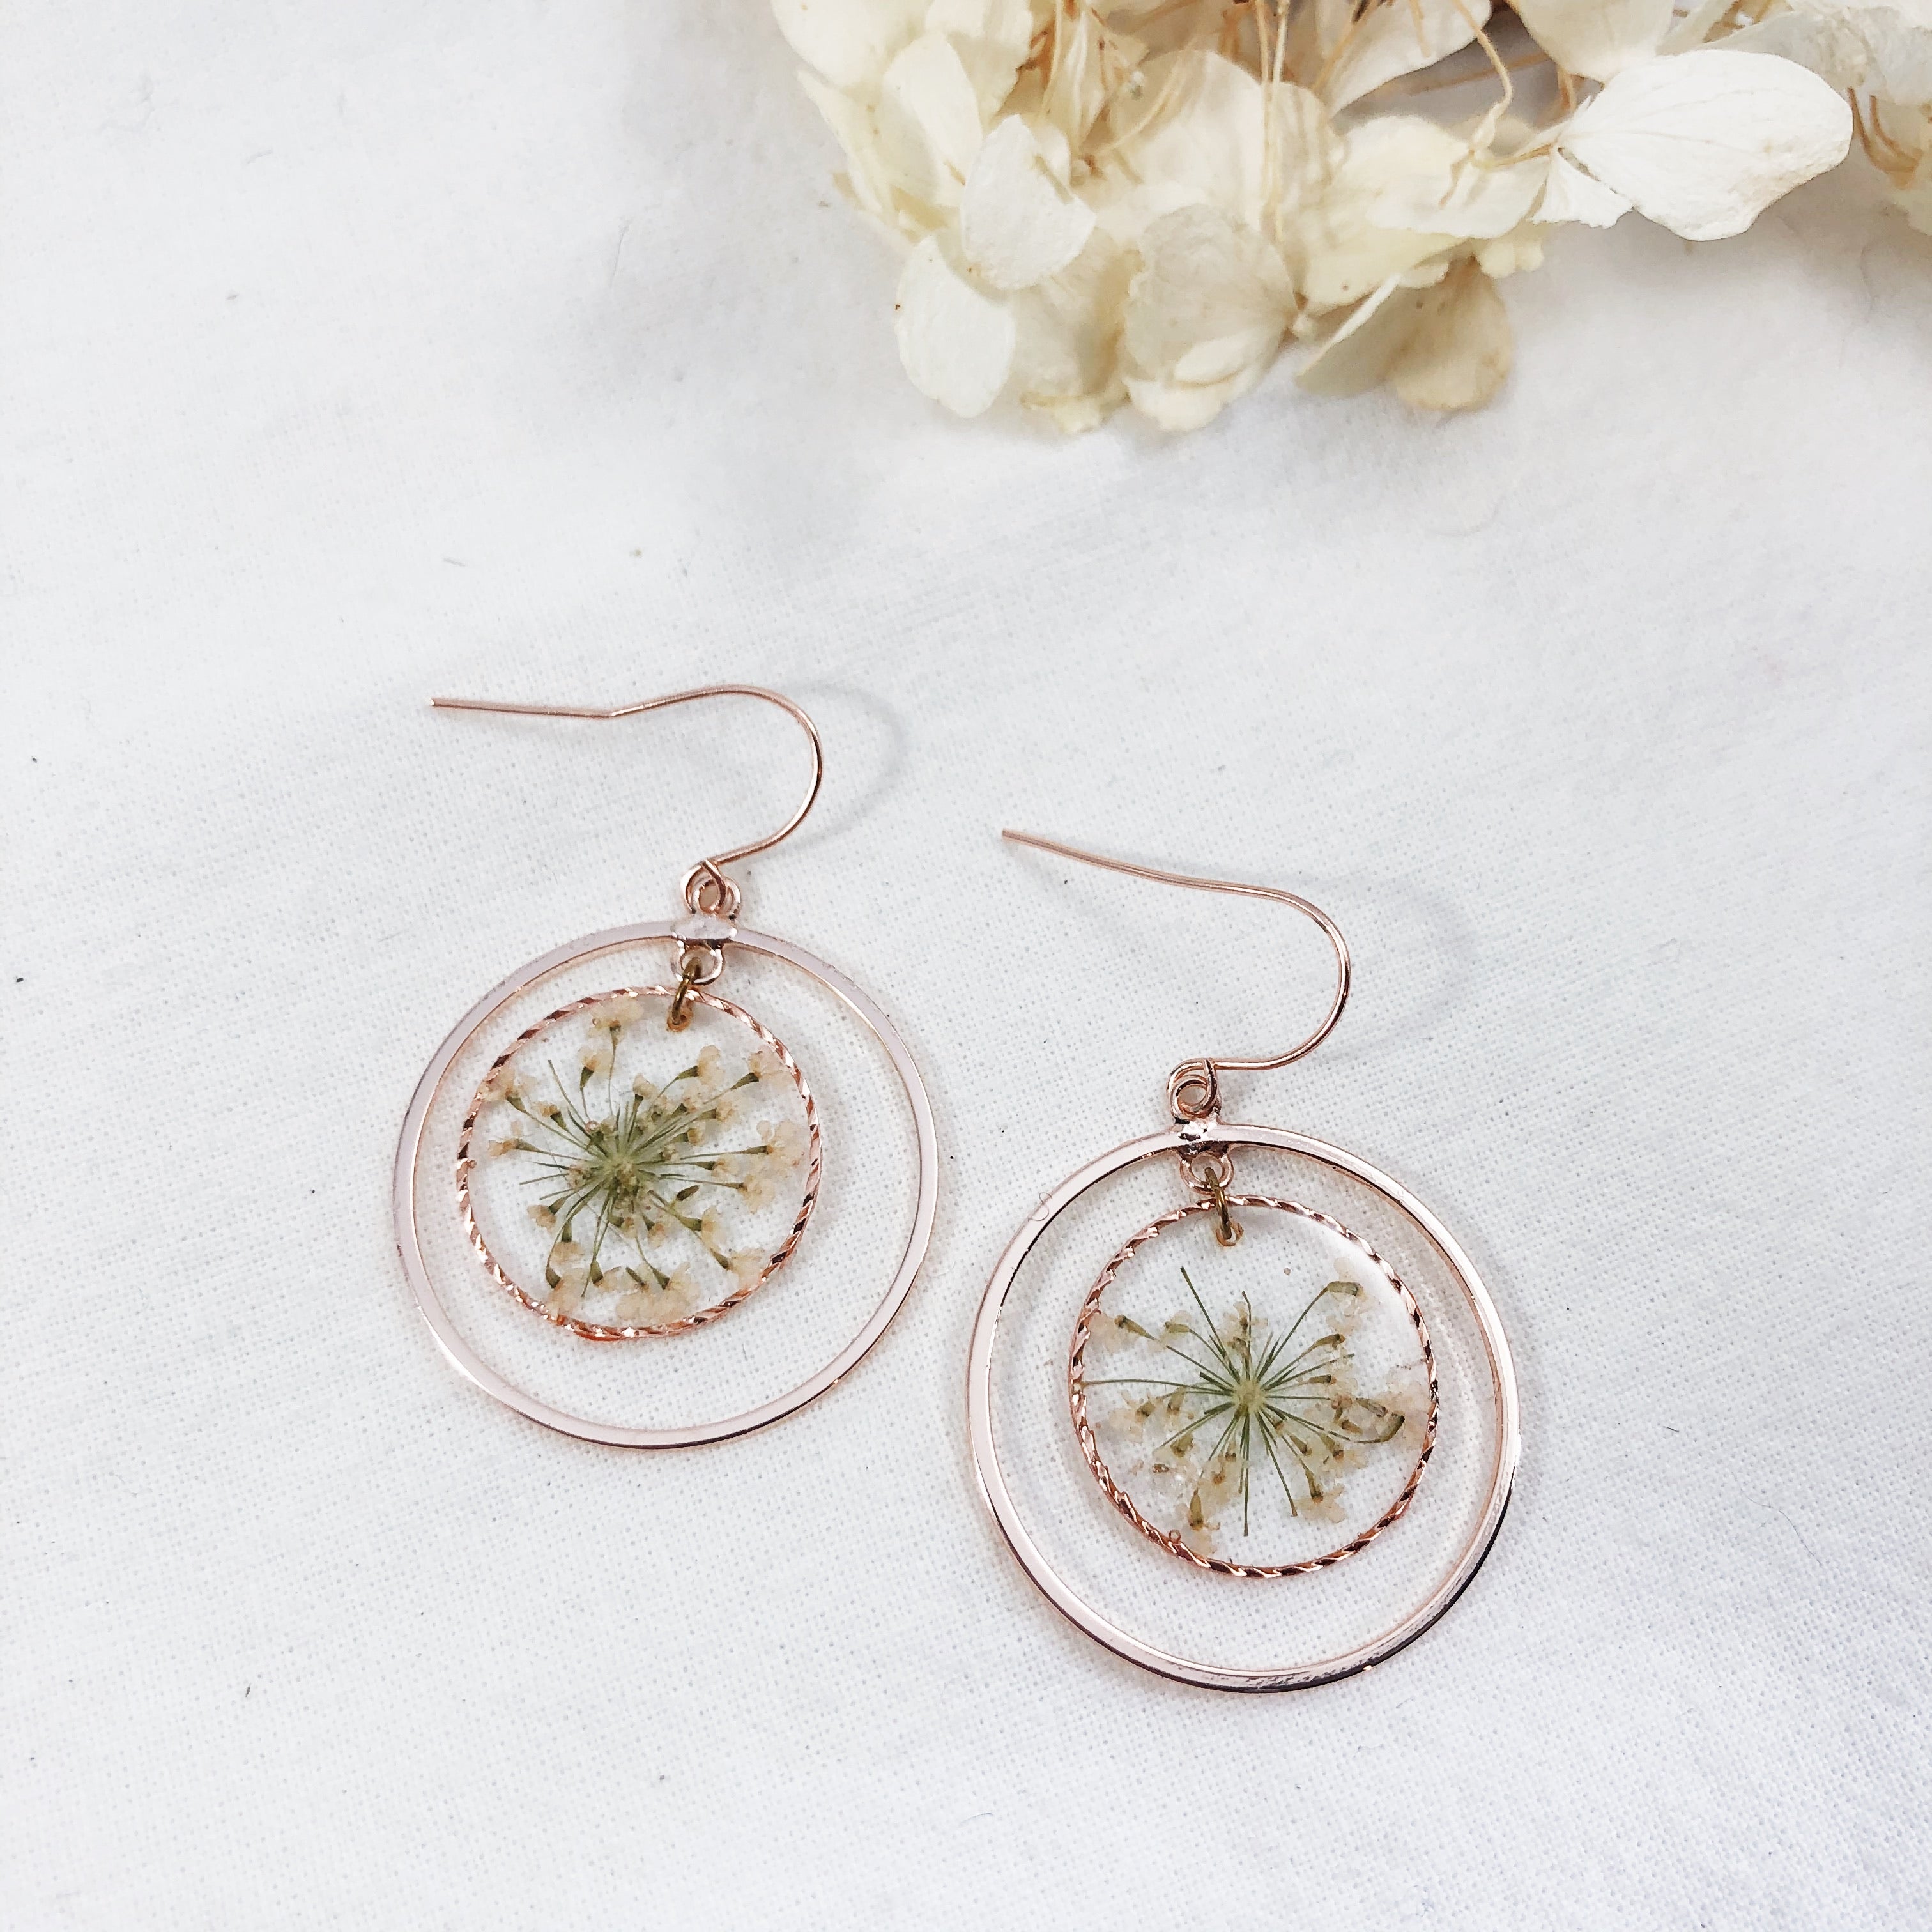 Wholesale Free Shipping - Real Dried Flower Handmade Circle Resin Earring, Floral  Earrings, Gift for Her, Make With Real Flower Earrings, Gift for Mom for  your store - Faire